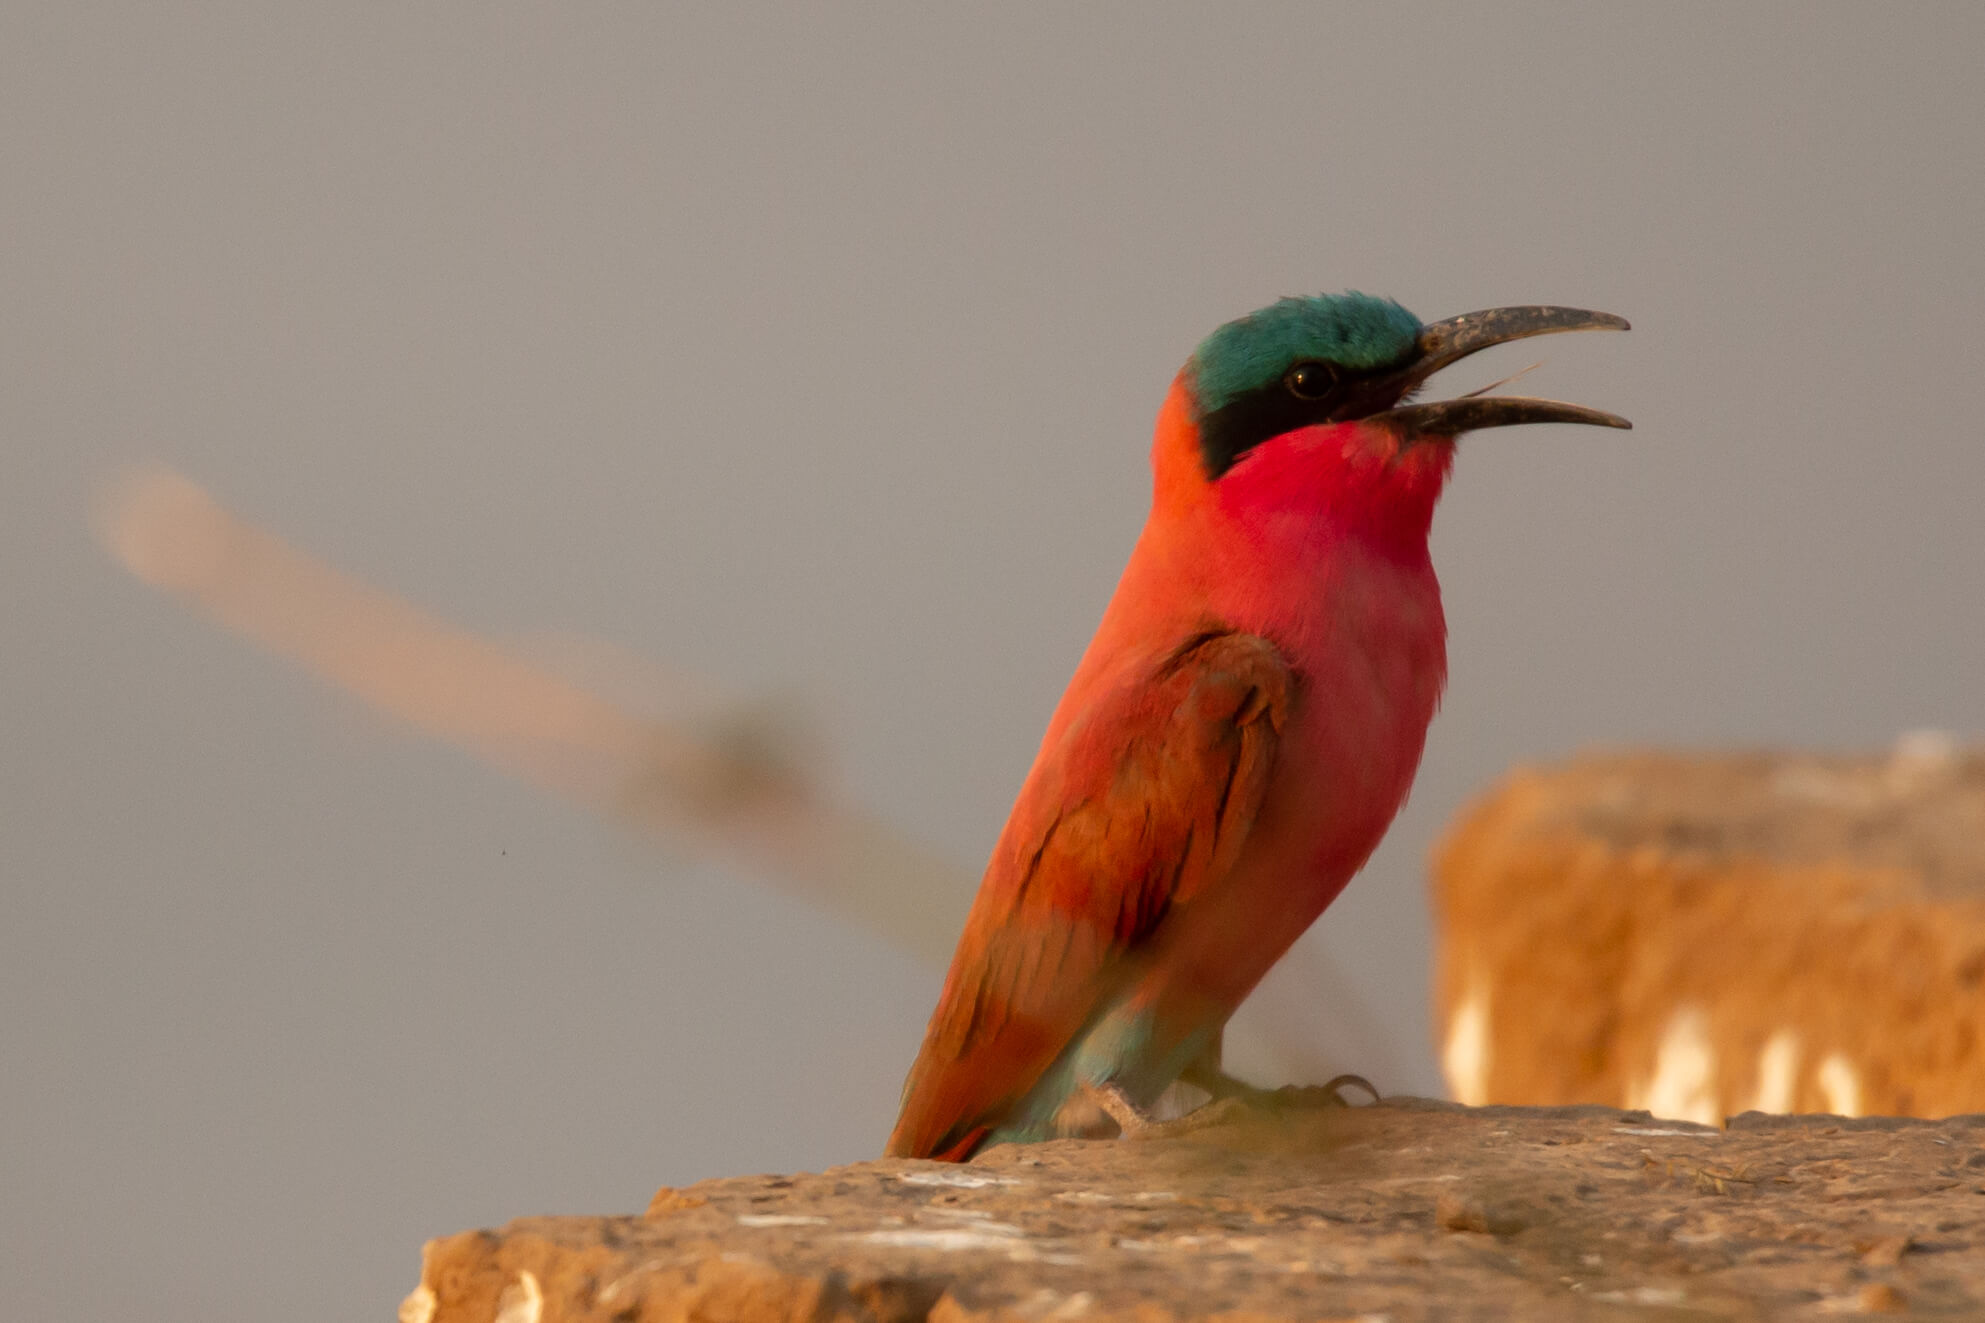 Carmine bee-eater in South Luangwa National Park Zambia